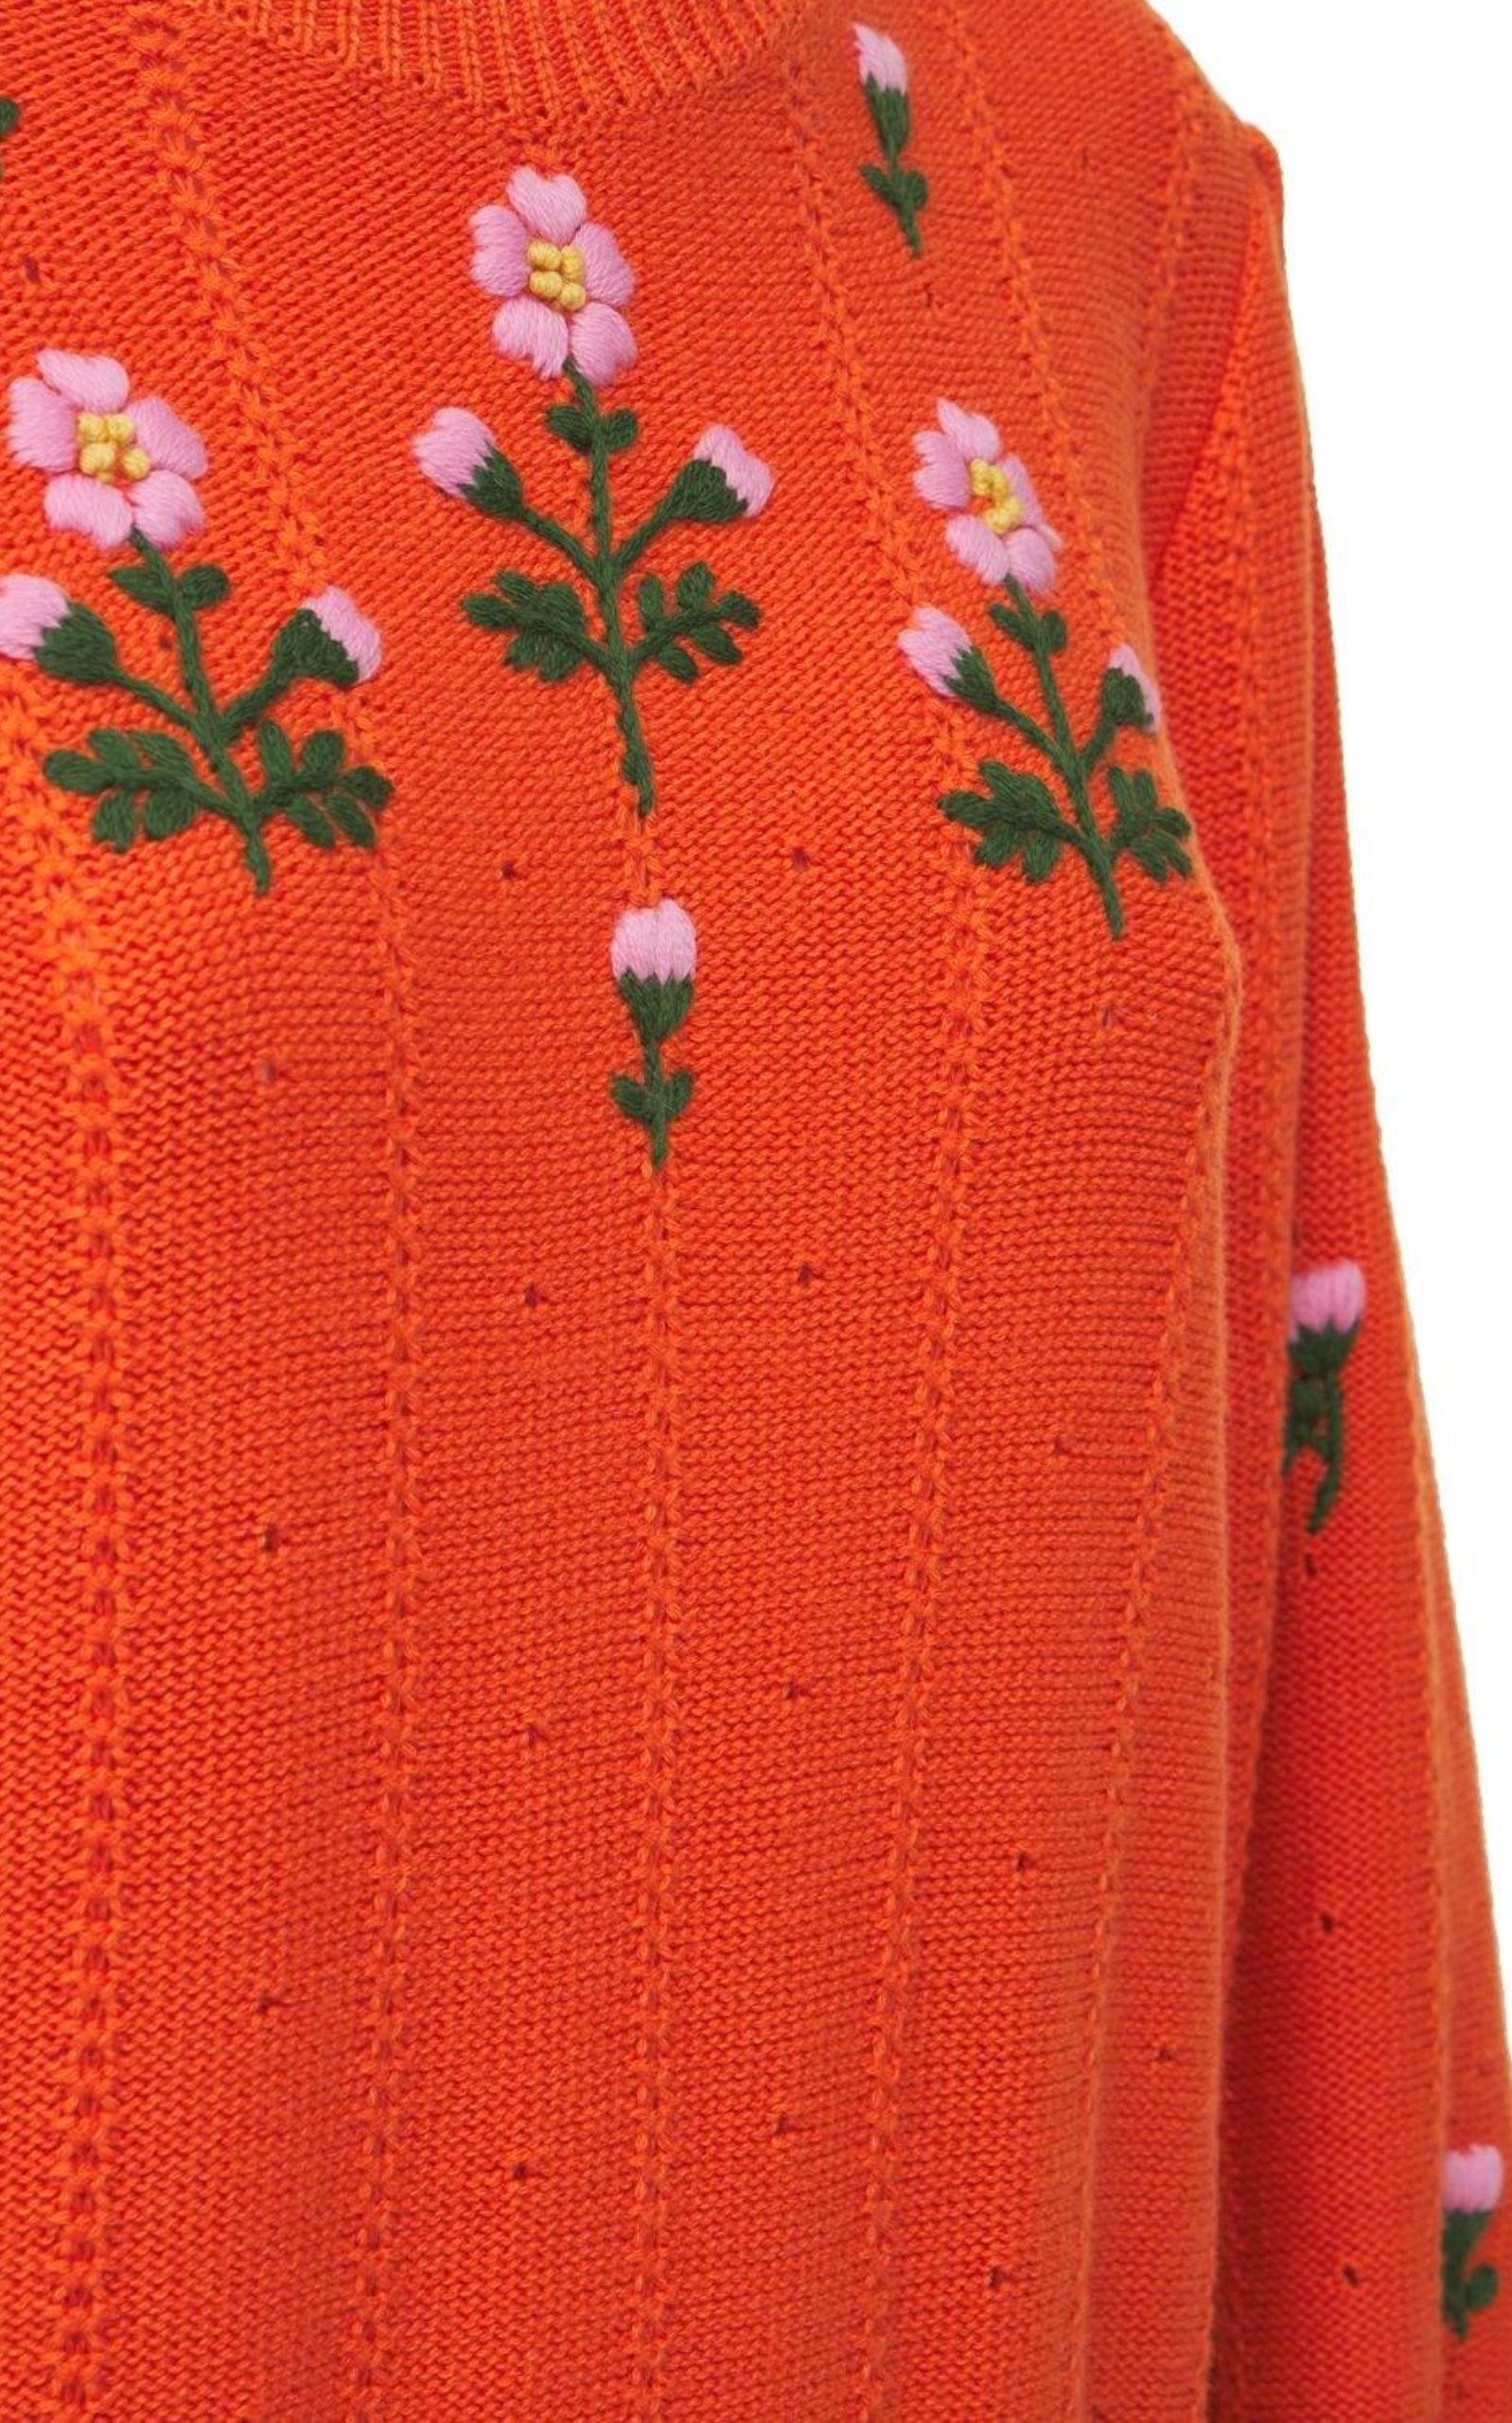  GucciFloral Embroidered Wool Blend Sweater - Runway Catalog